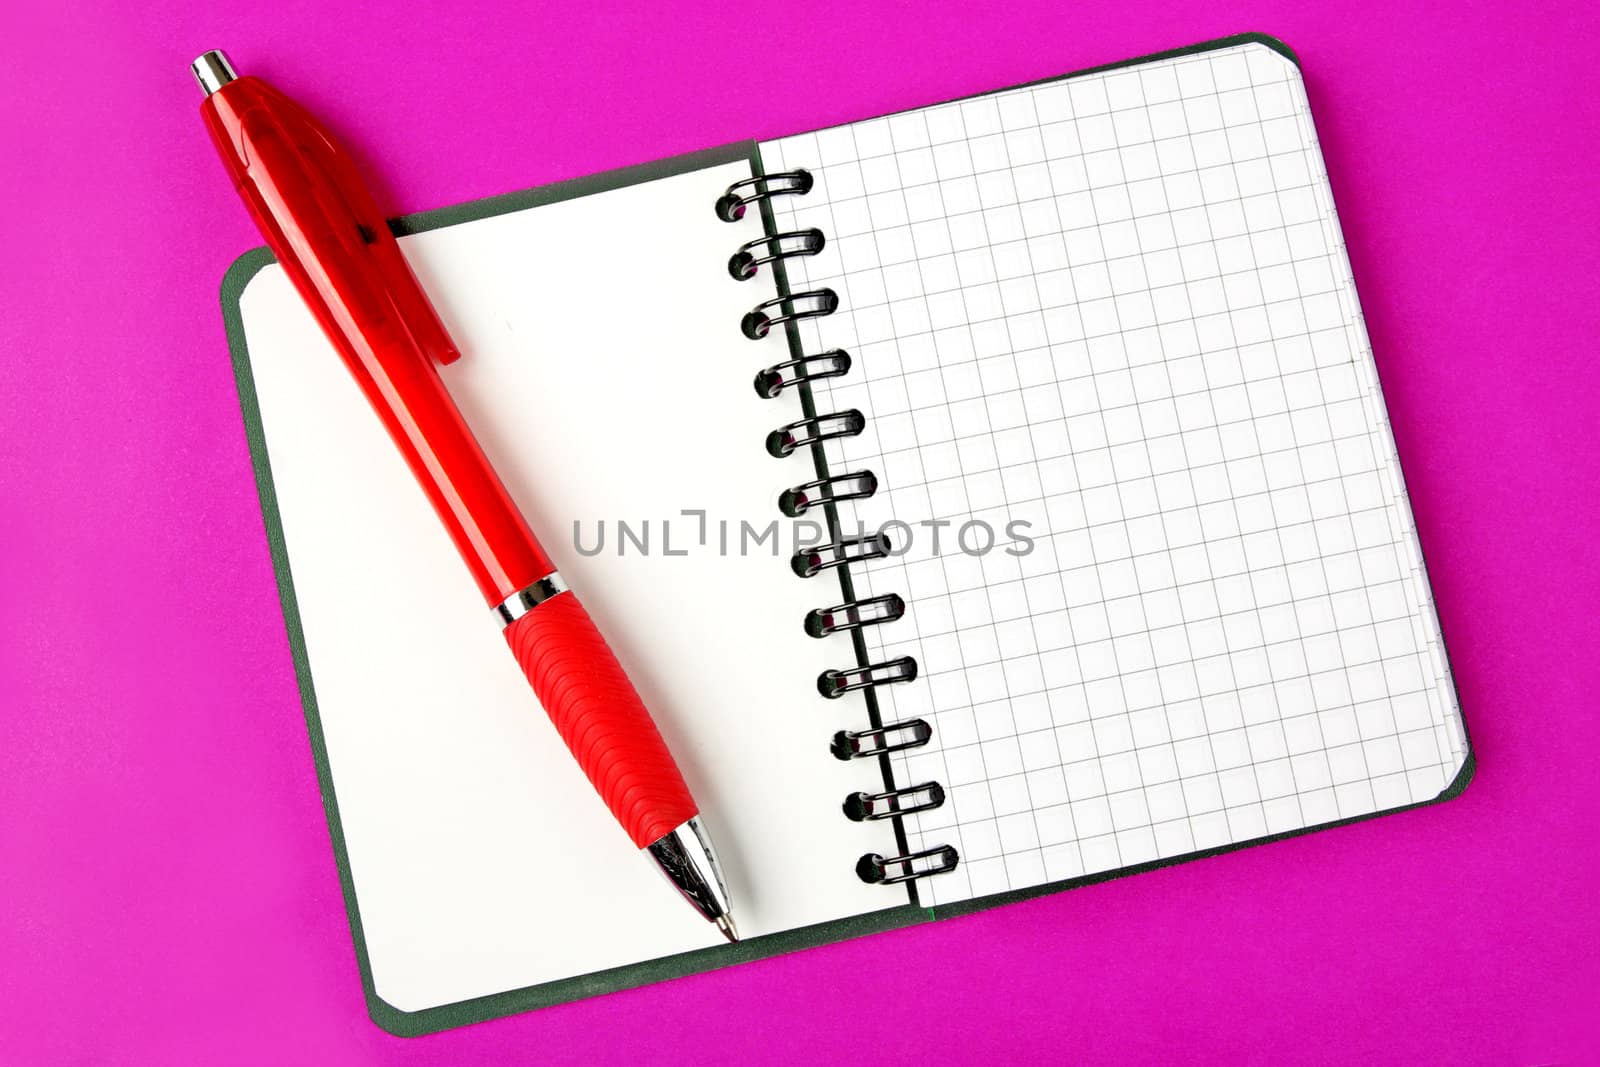 Opened notebook squared pagewith red pen over it on purple backg by Verdateo